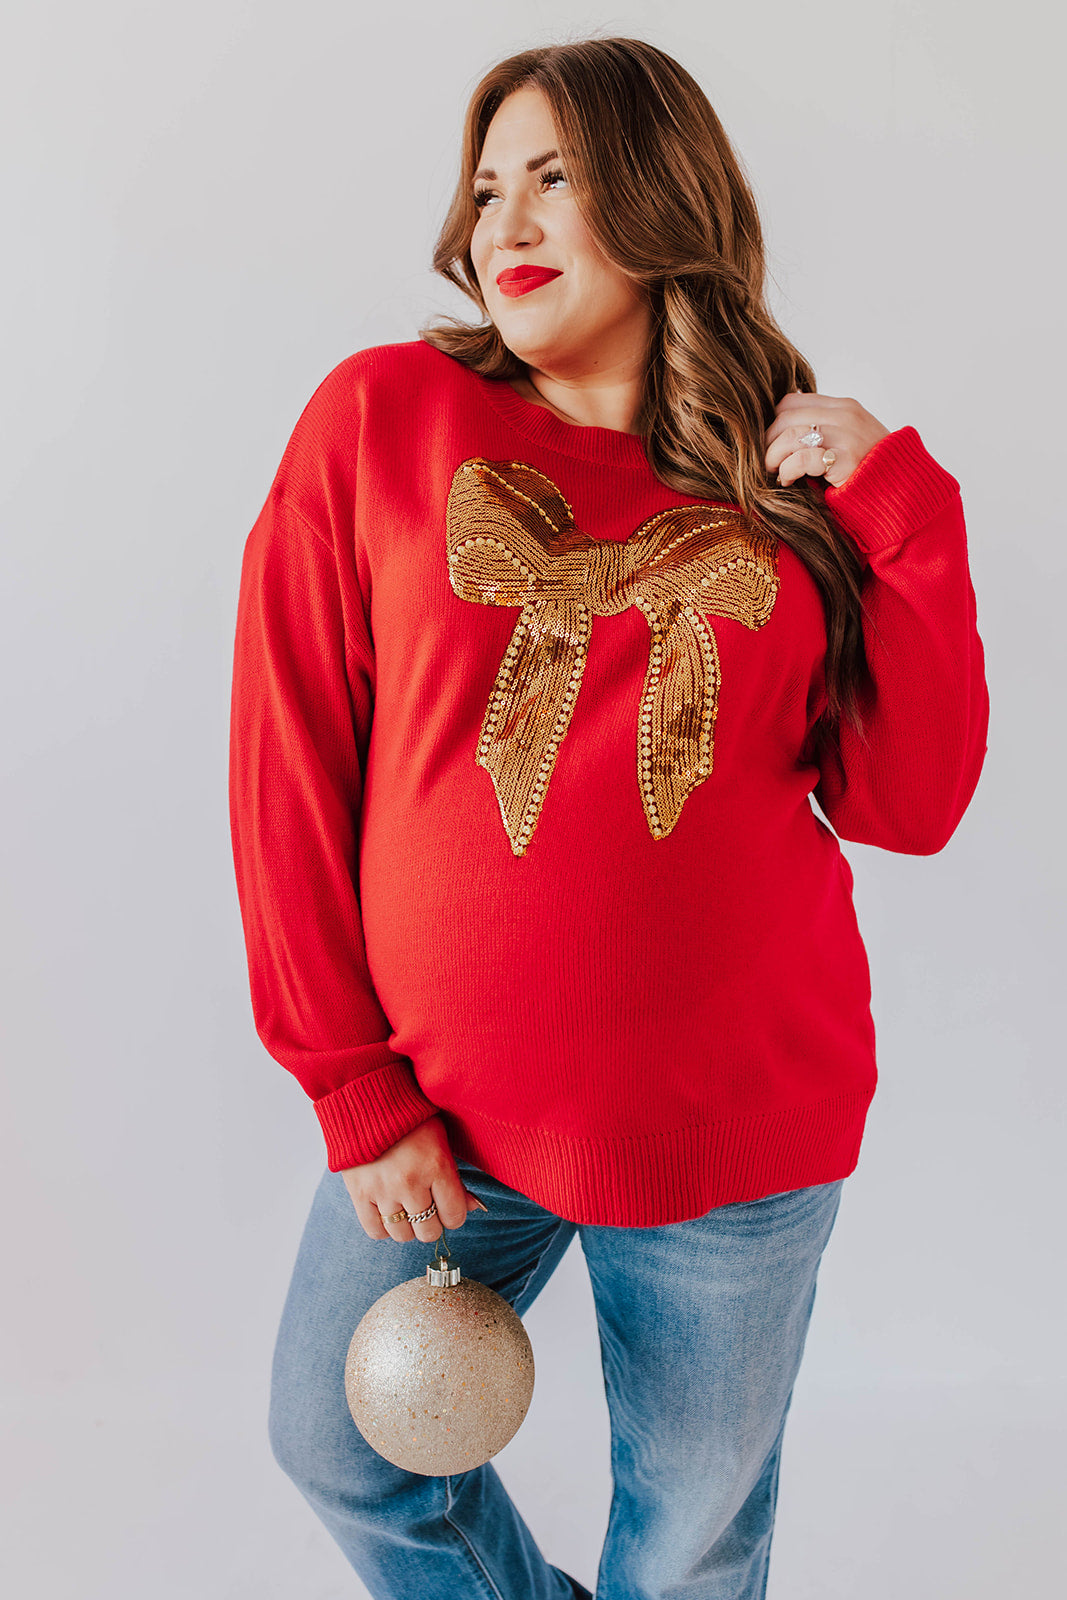 THE SEASON OF GIVING SWEATER IN RED